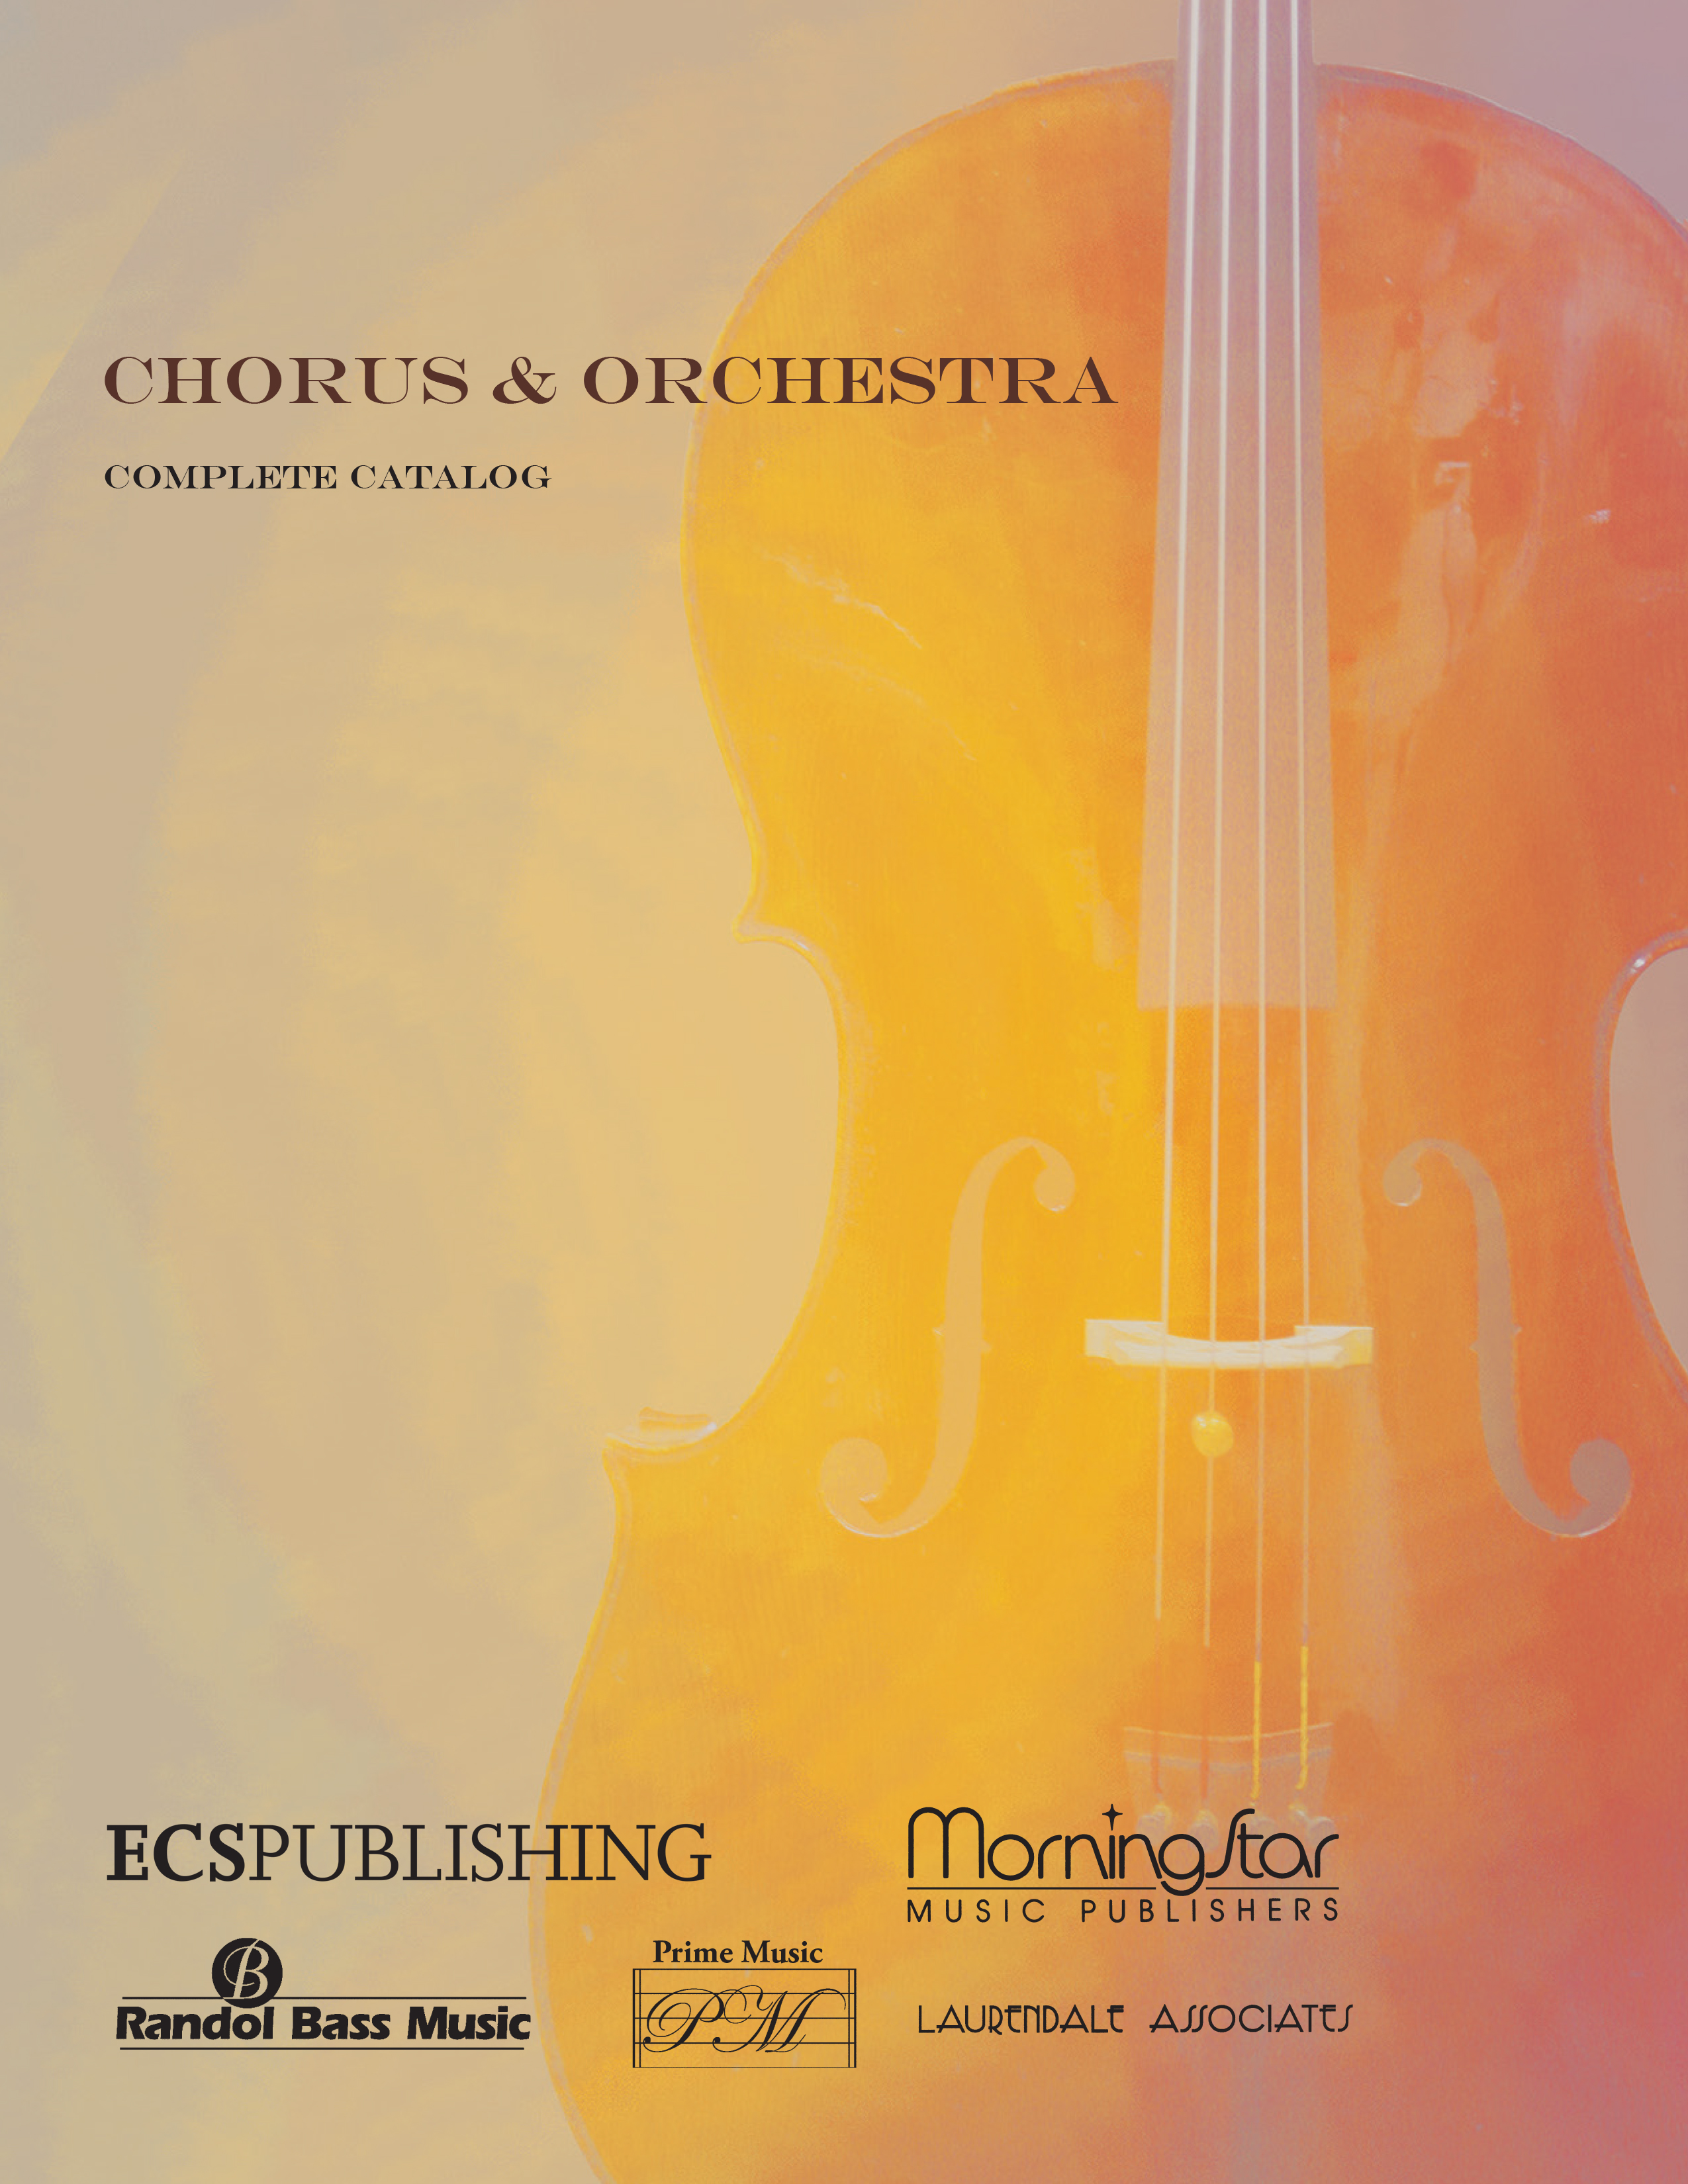 Canticle Distributing Chorus with Orchestra Catalog